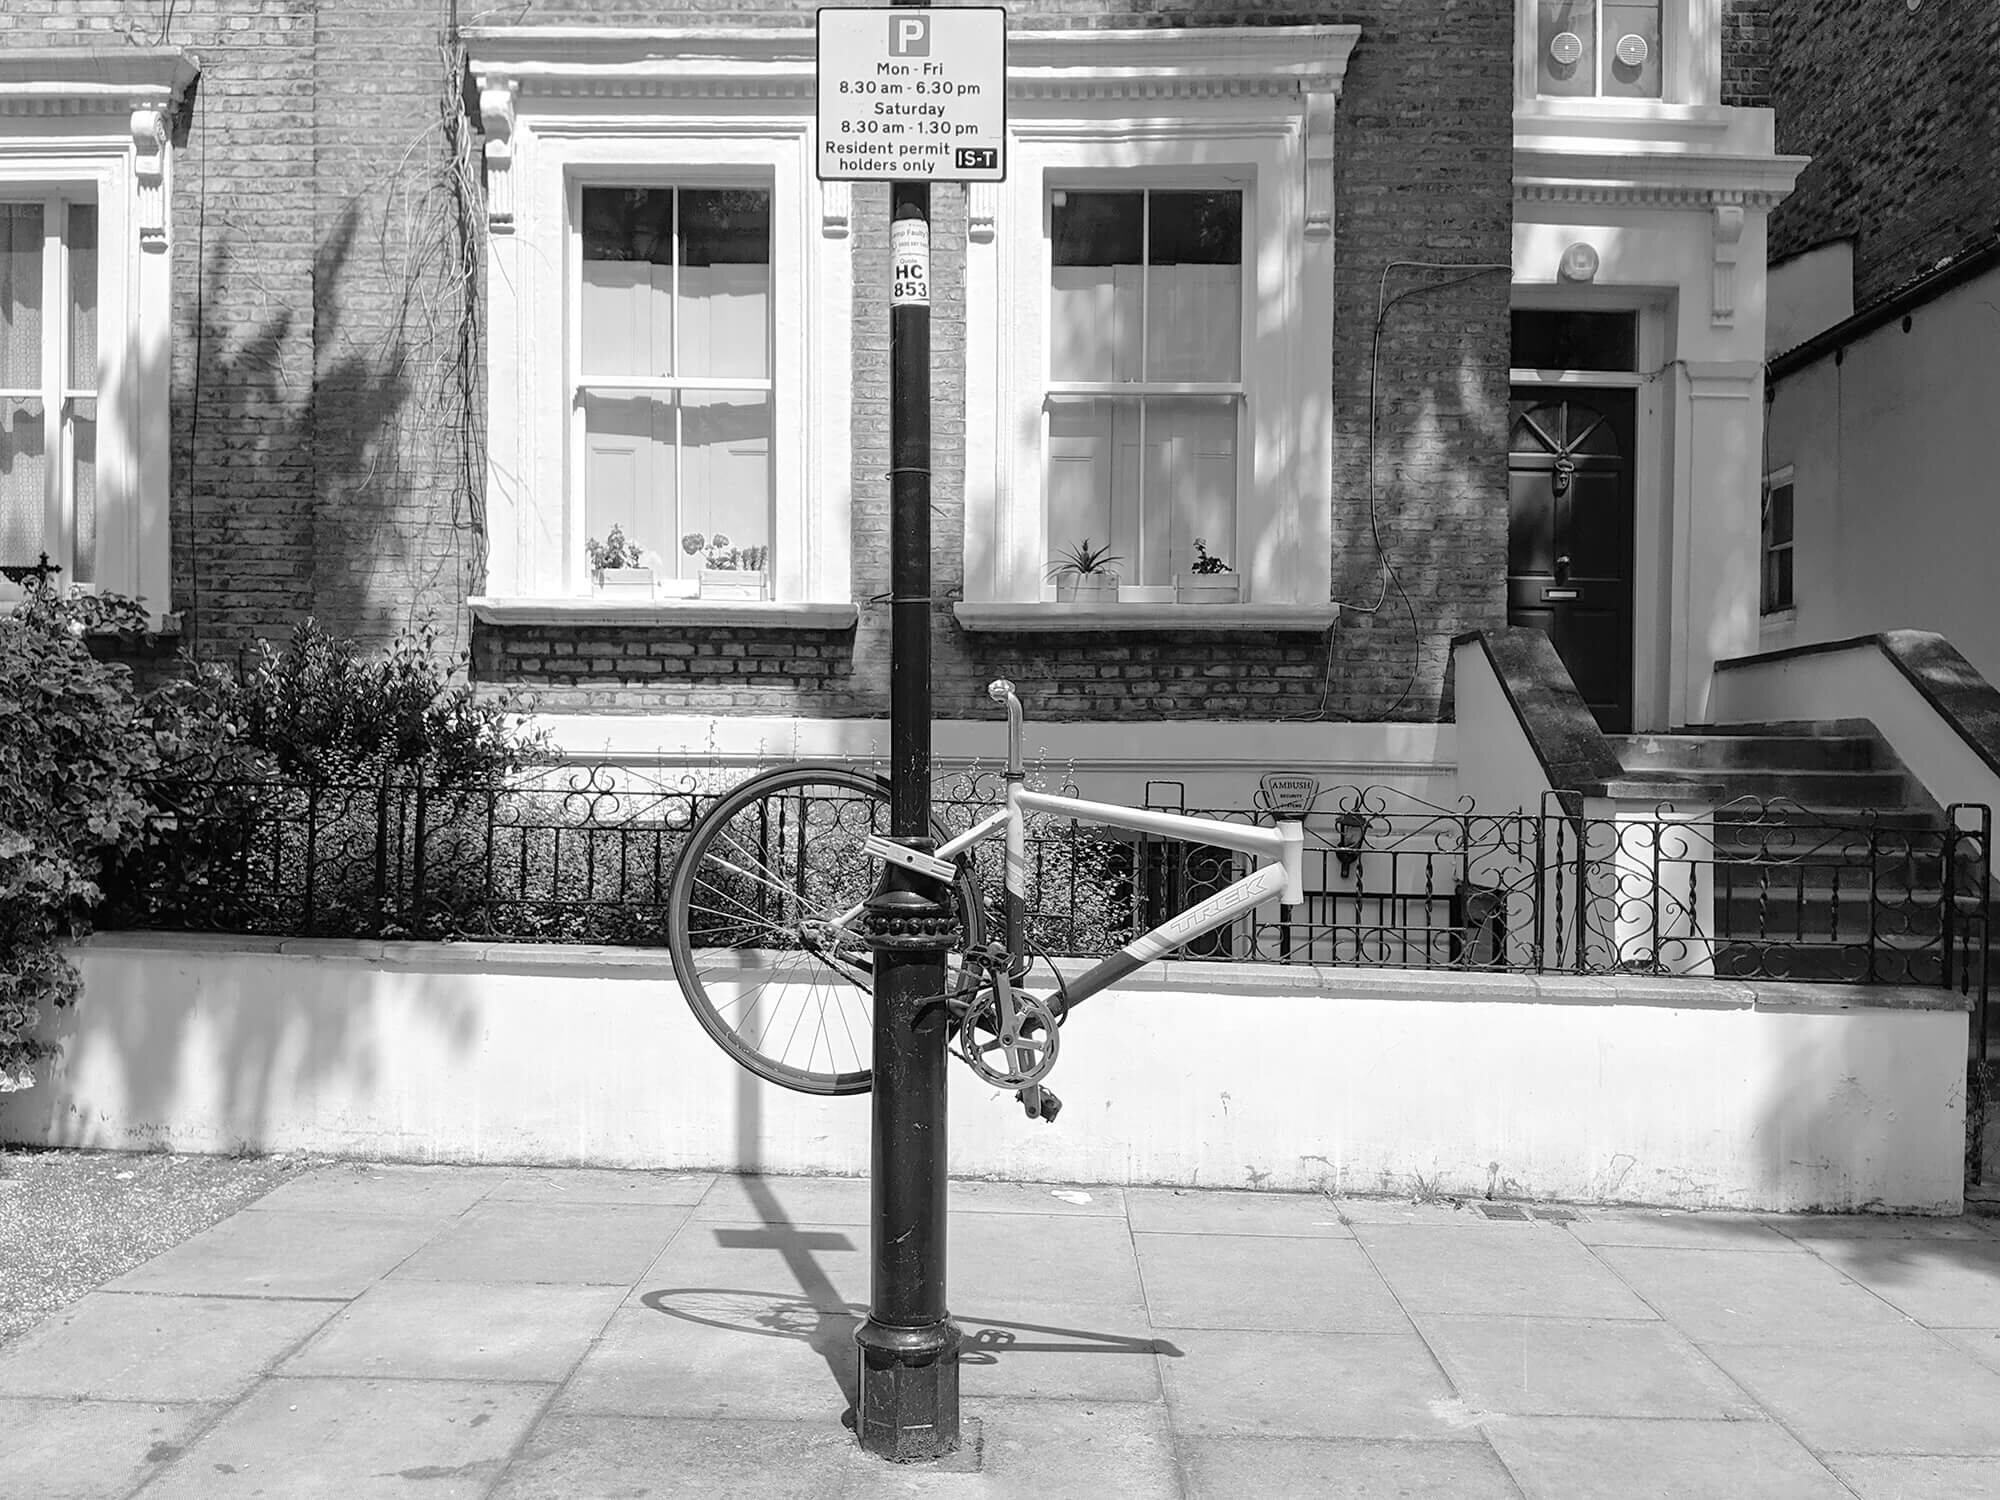 Road bike hanging on a lamppost. No front wheel or forks. London street.